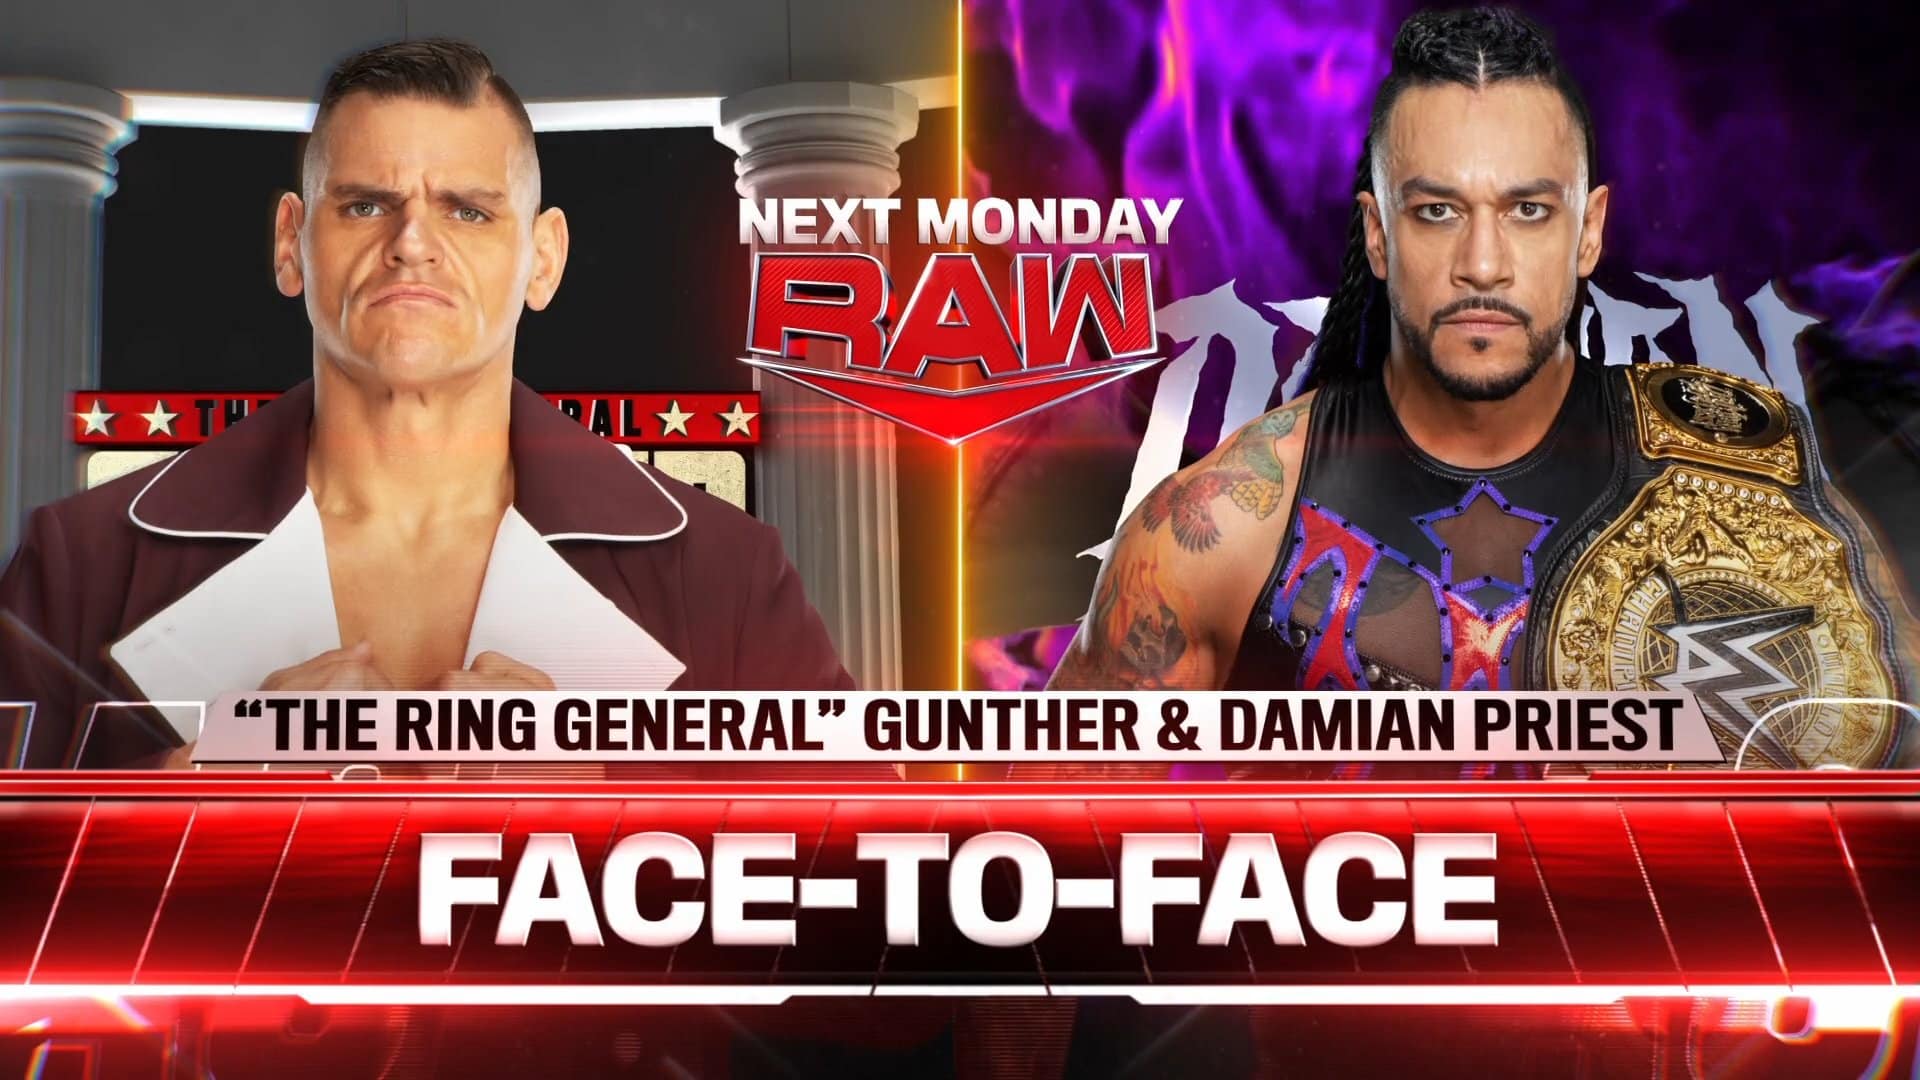 GUNTHER and Damian Priest are slated for a head-to-head encounter and more, as promoted for the forthcoming installment of WWE RAW next week.